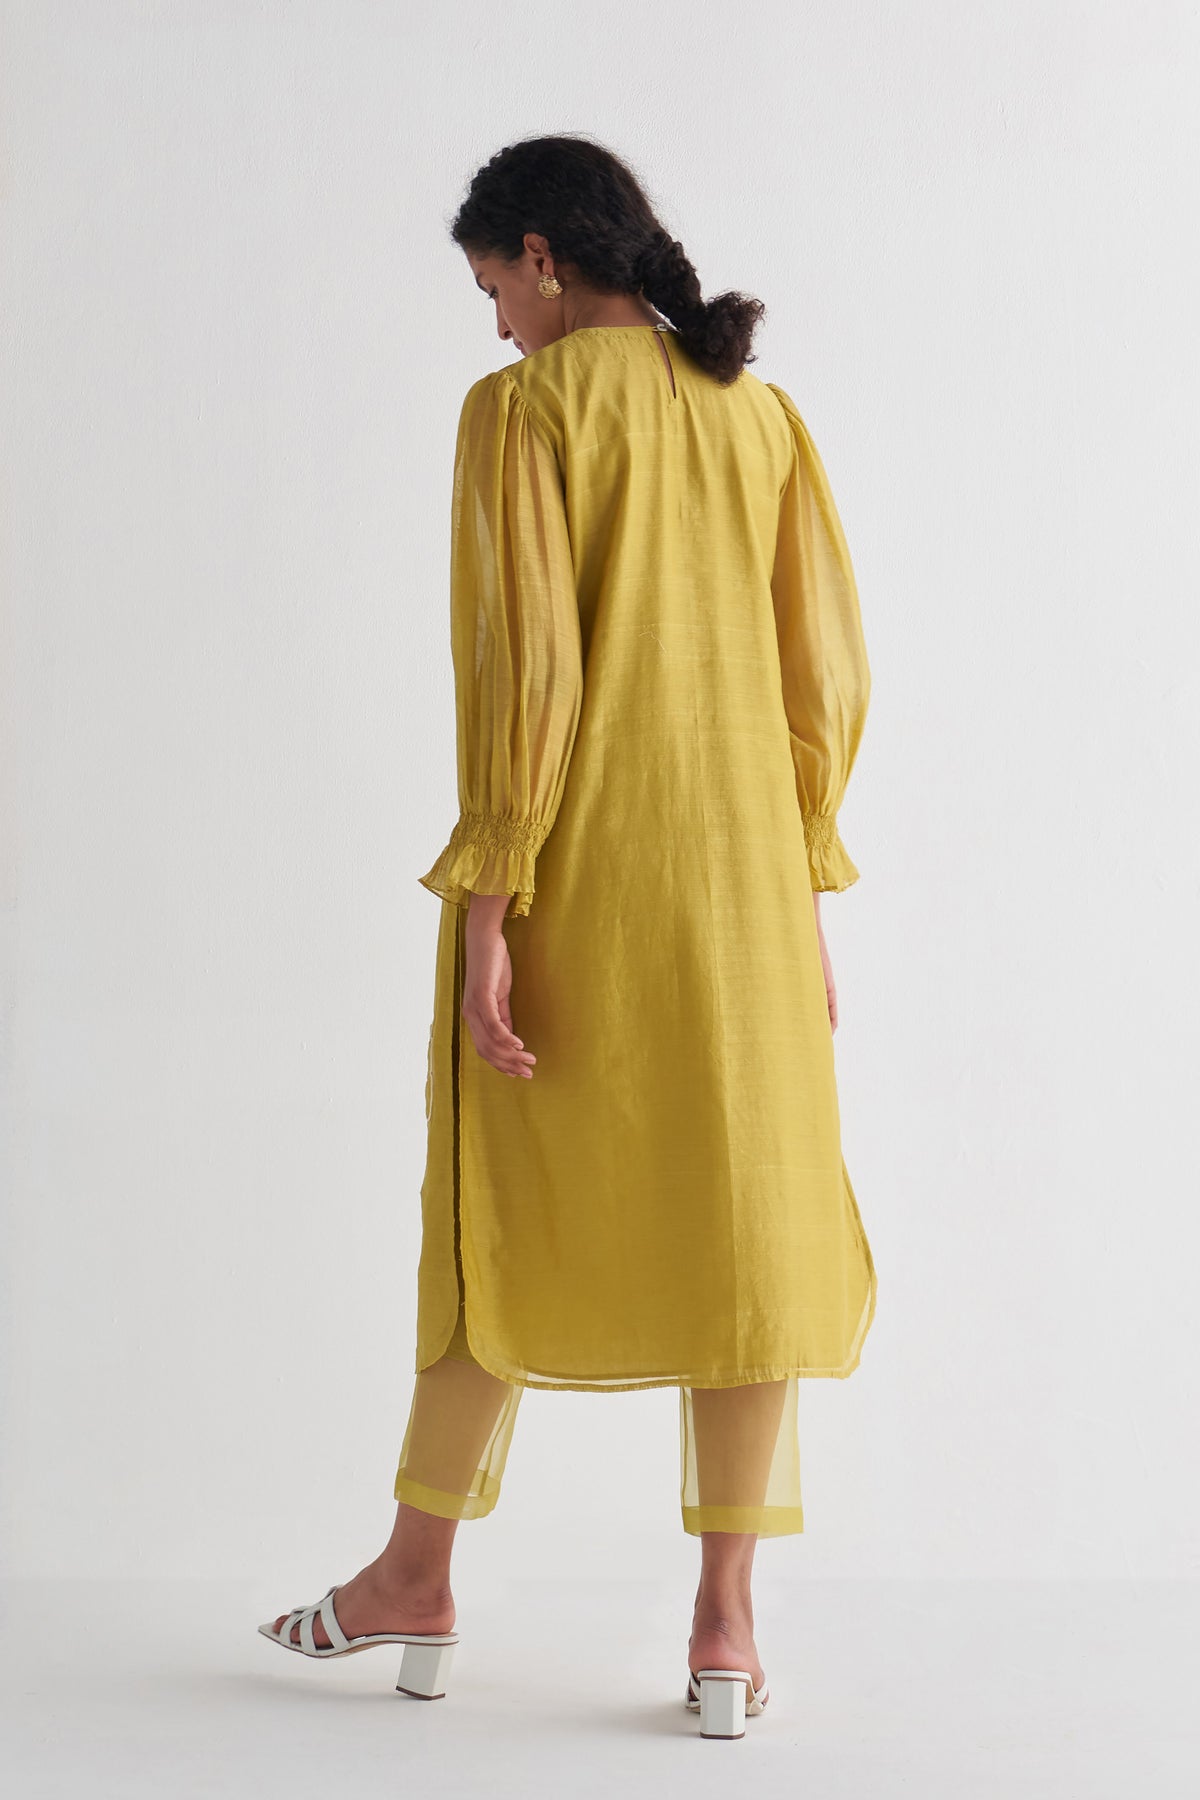 Amber Yellow Couching Dress with sheer pants